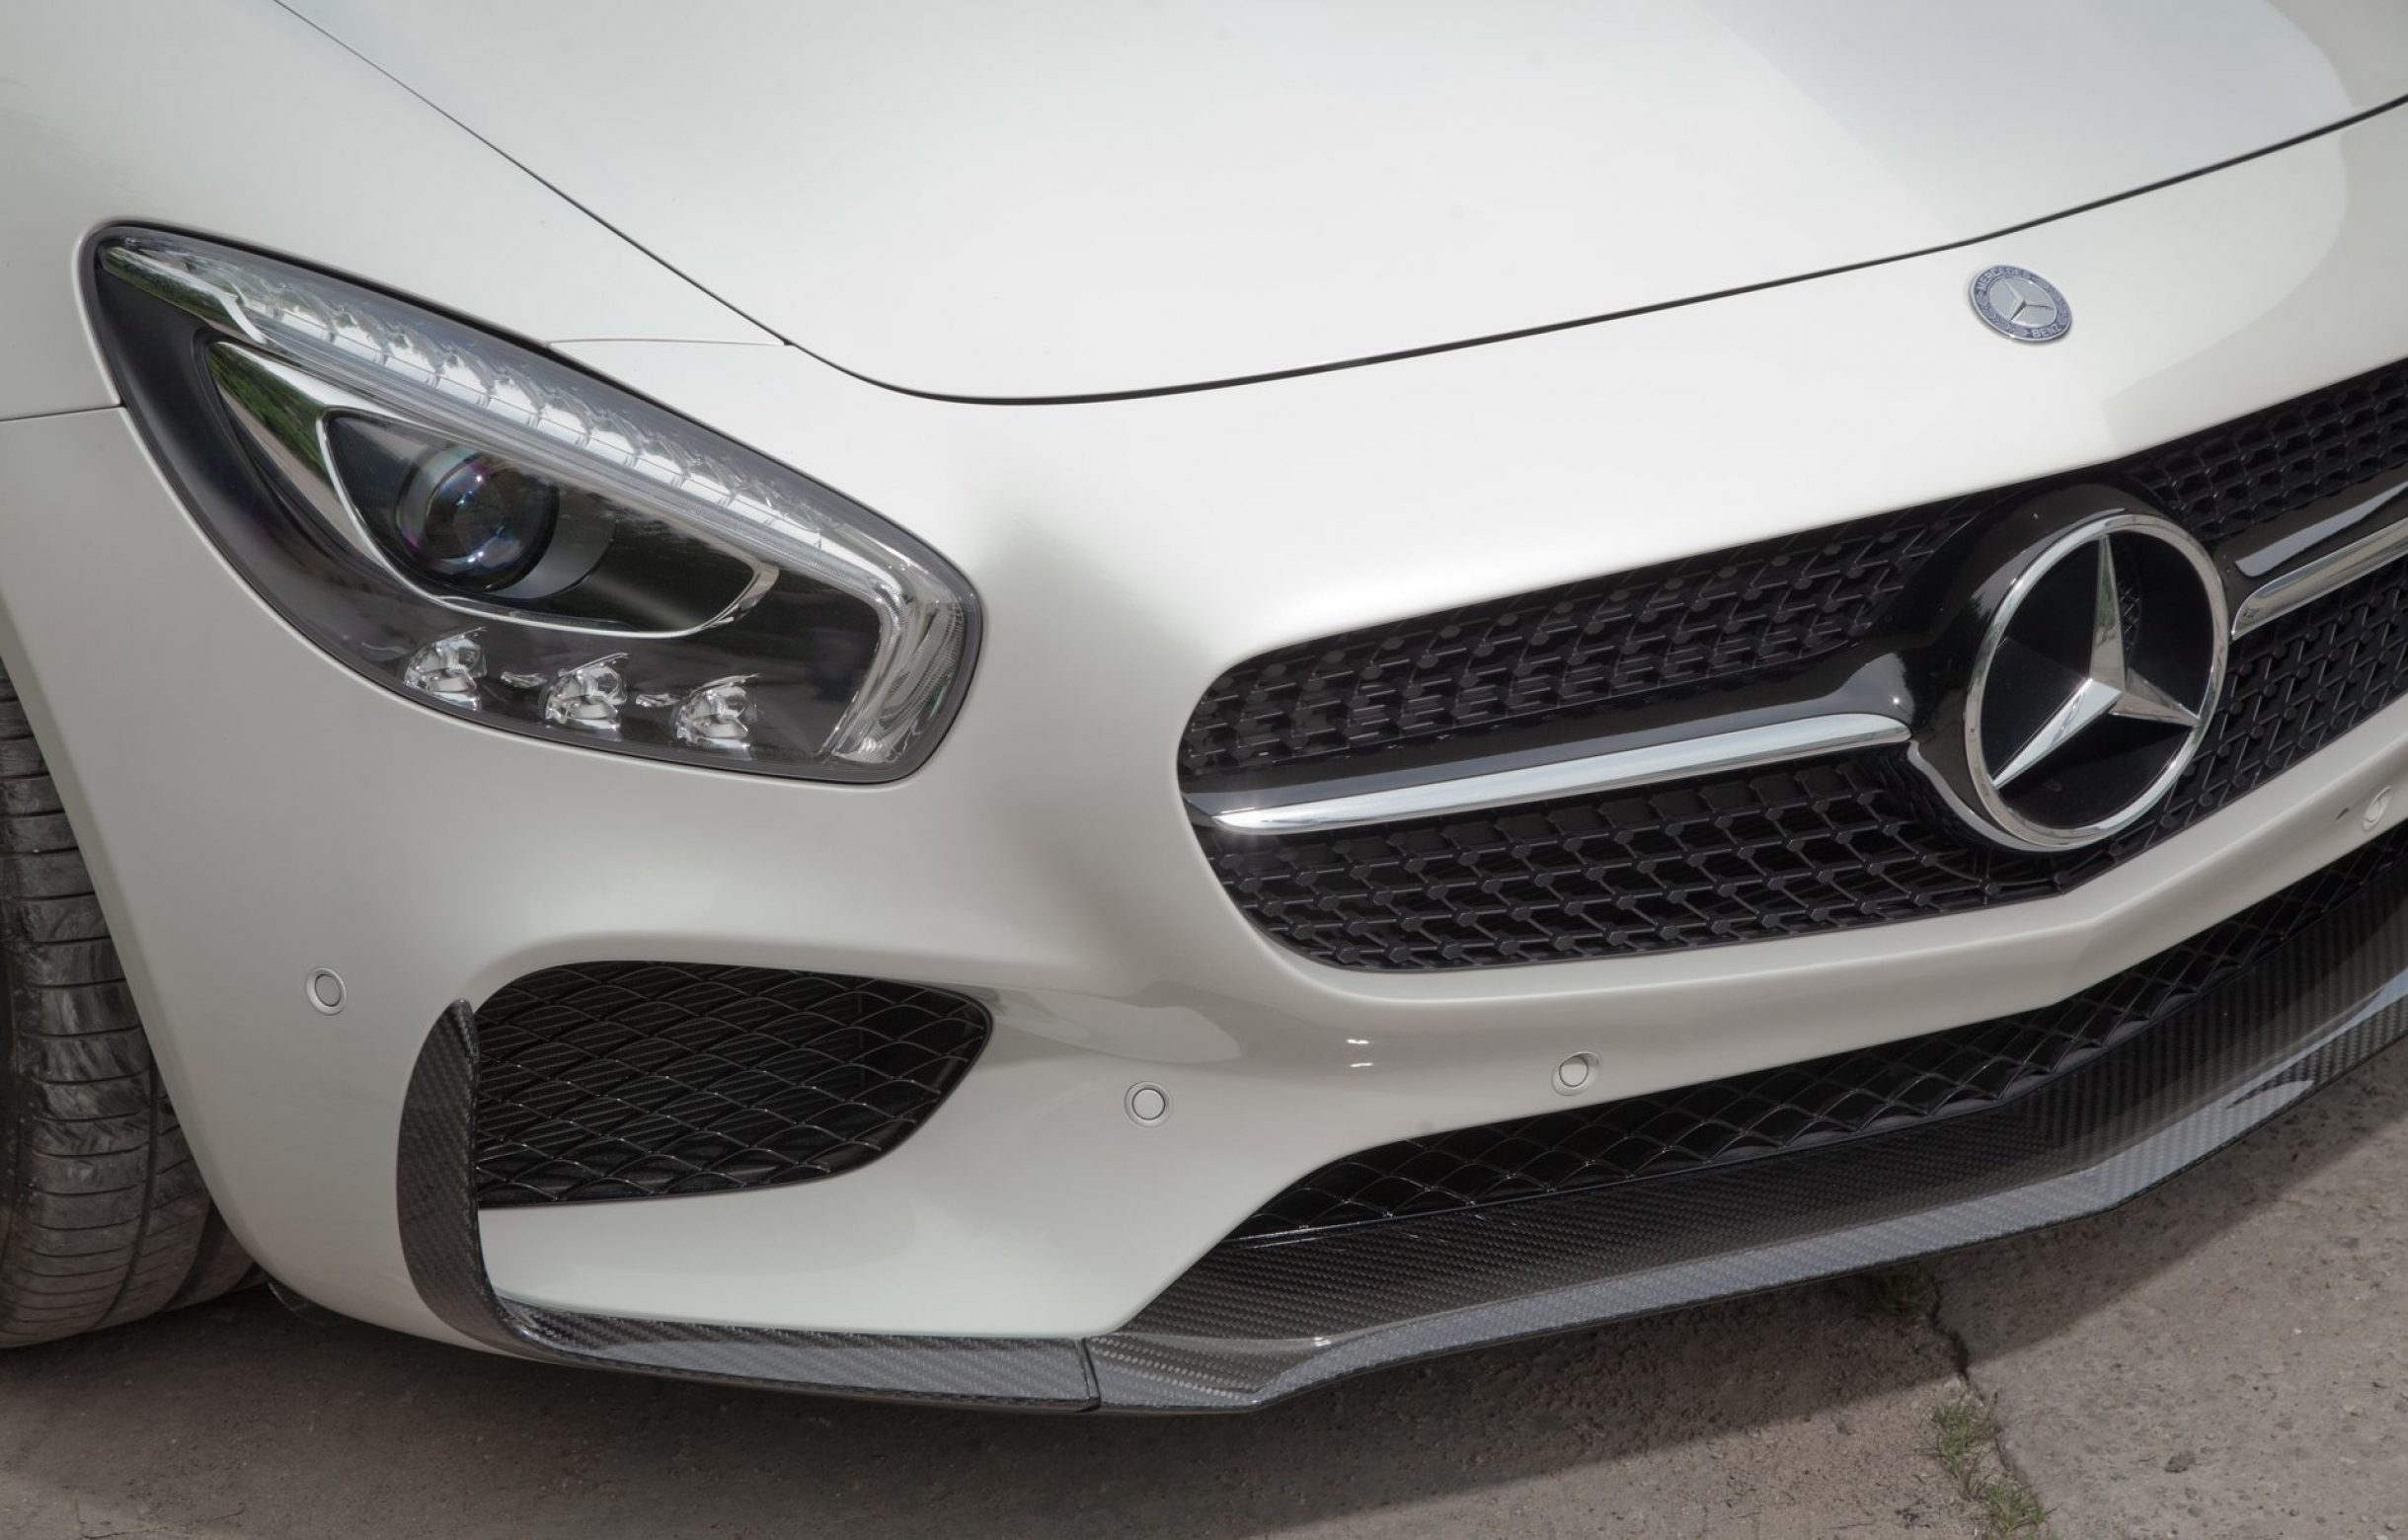 Check our price and buy Carbon Fiber Body kit set for Mercedes AMG GT Coupe!